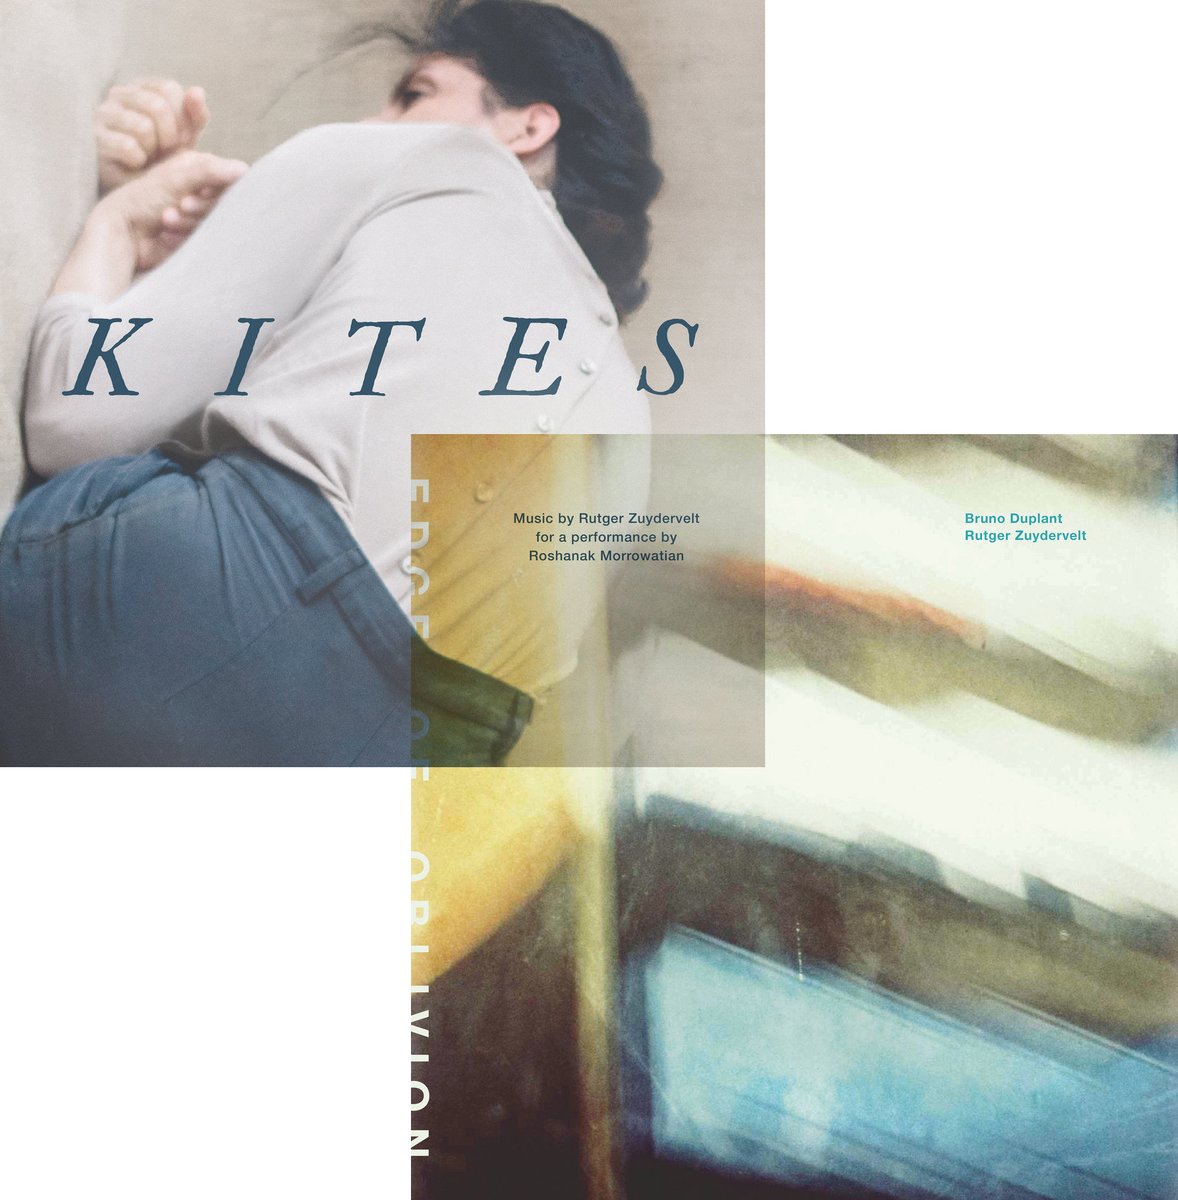 Kites (music for a performance by Roshanak Morrowatian) and Edge of Oblivion (with Bruno Duplant) will be released this Thursday. machinefabriek.bandcamp.com/album/kites-mu… - machinefabriek.bandcamp.com/album/edge-of-…